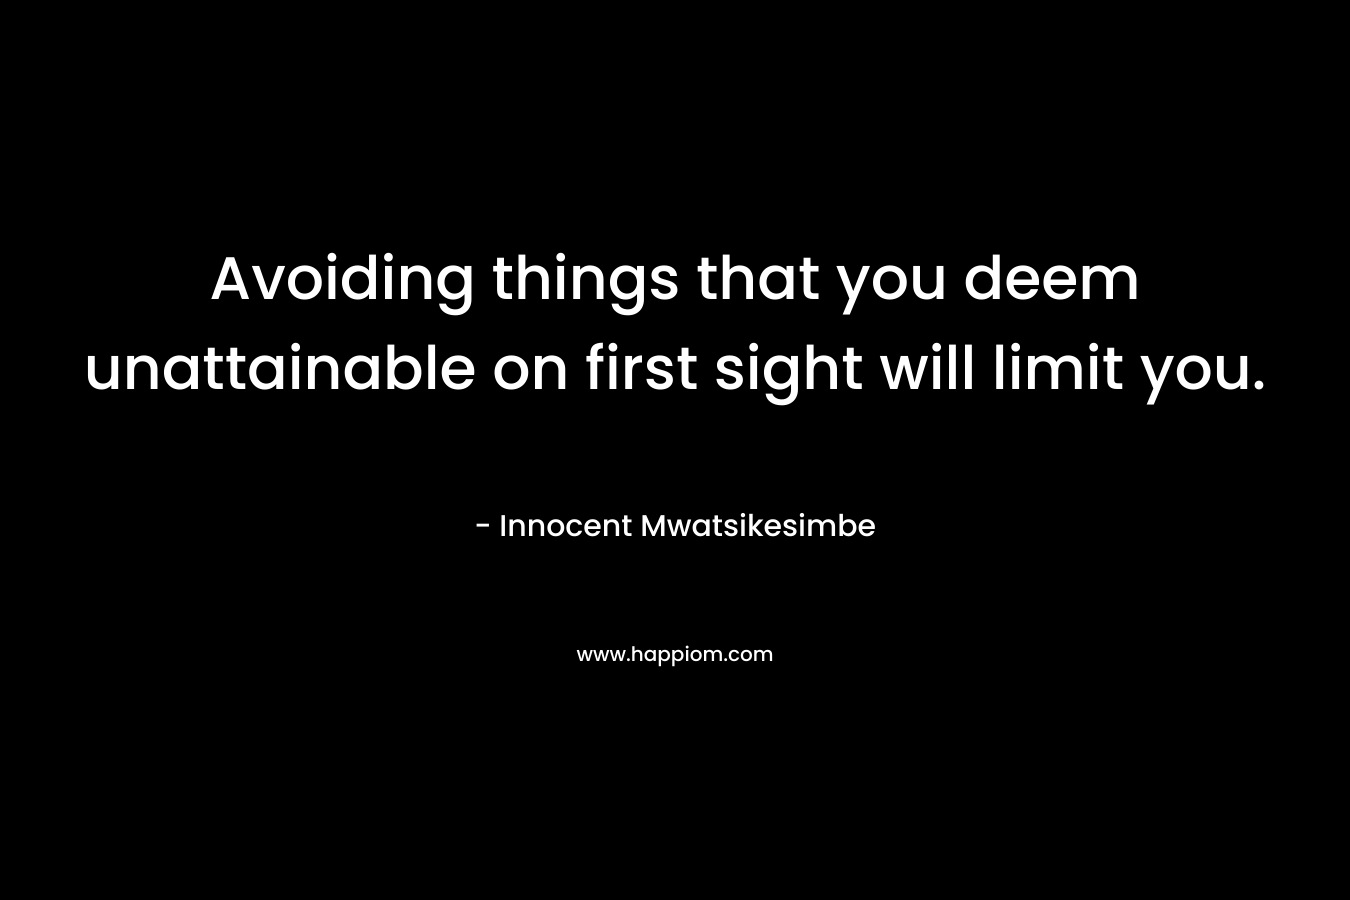 Avoiding things that you deem unattainable on first sight will limit you.